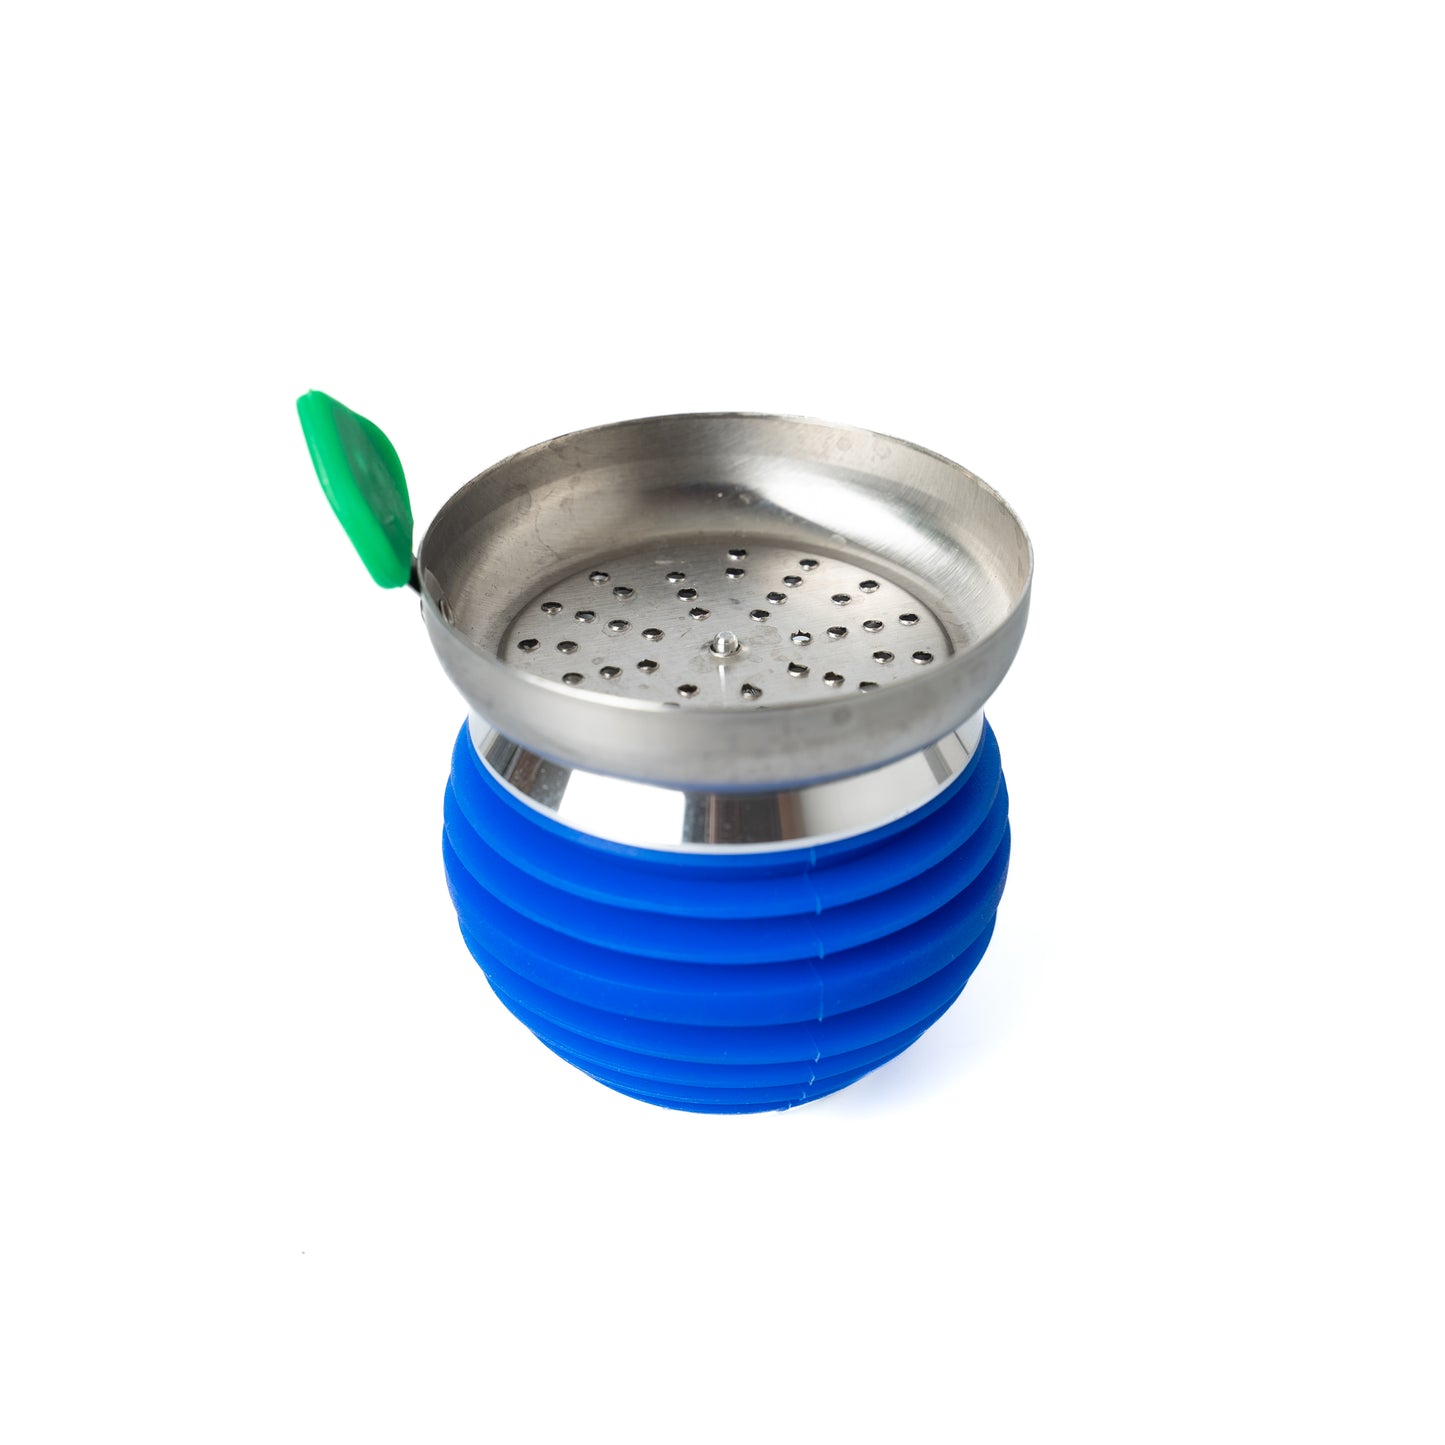 AOT Hookah Bowl with HMD - Blue